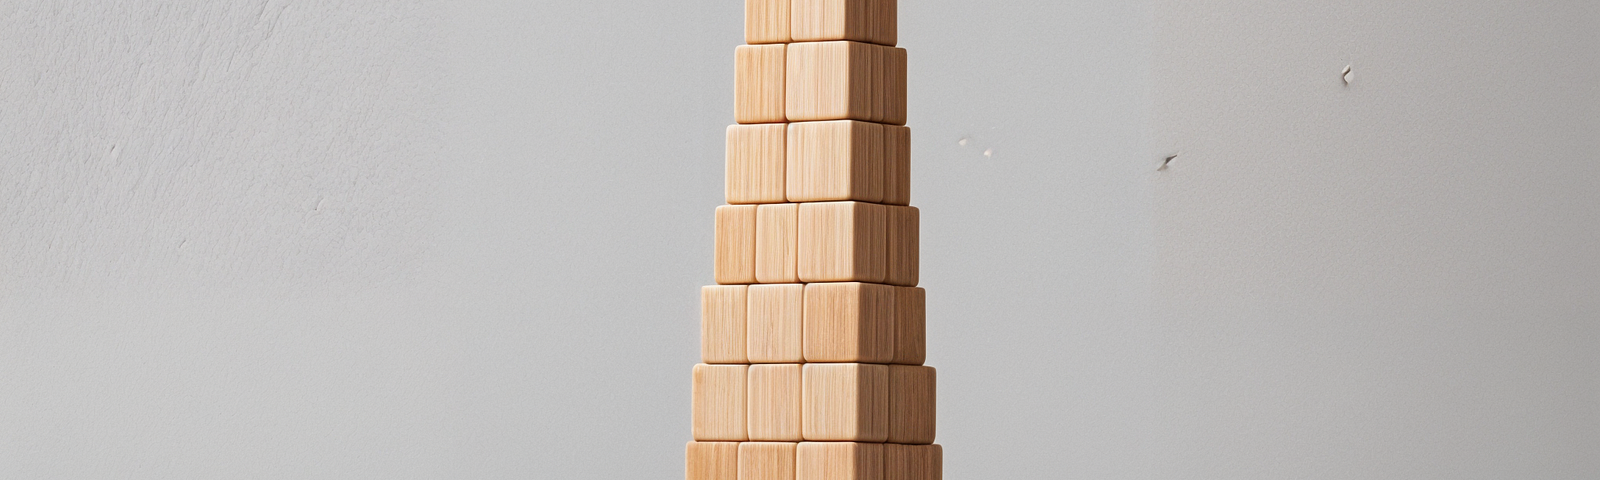 To make a pile of code blocks represent a tower, you have to adapt some pieces. Generated by AI